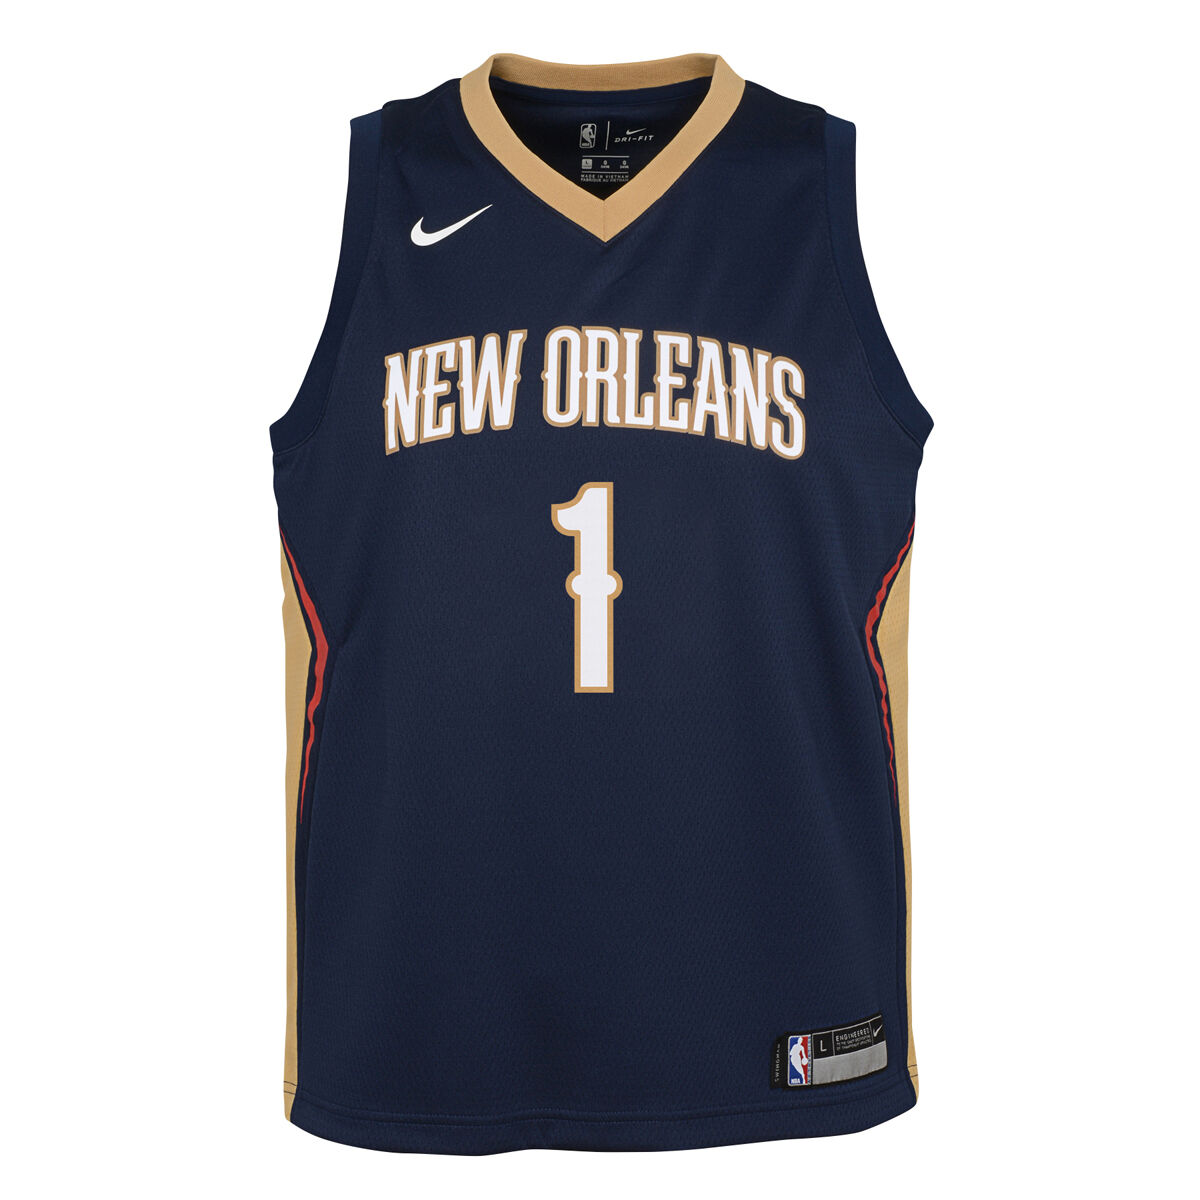 zion jersey number